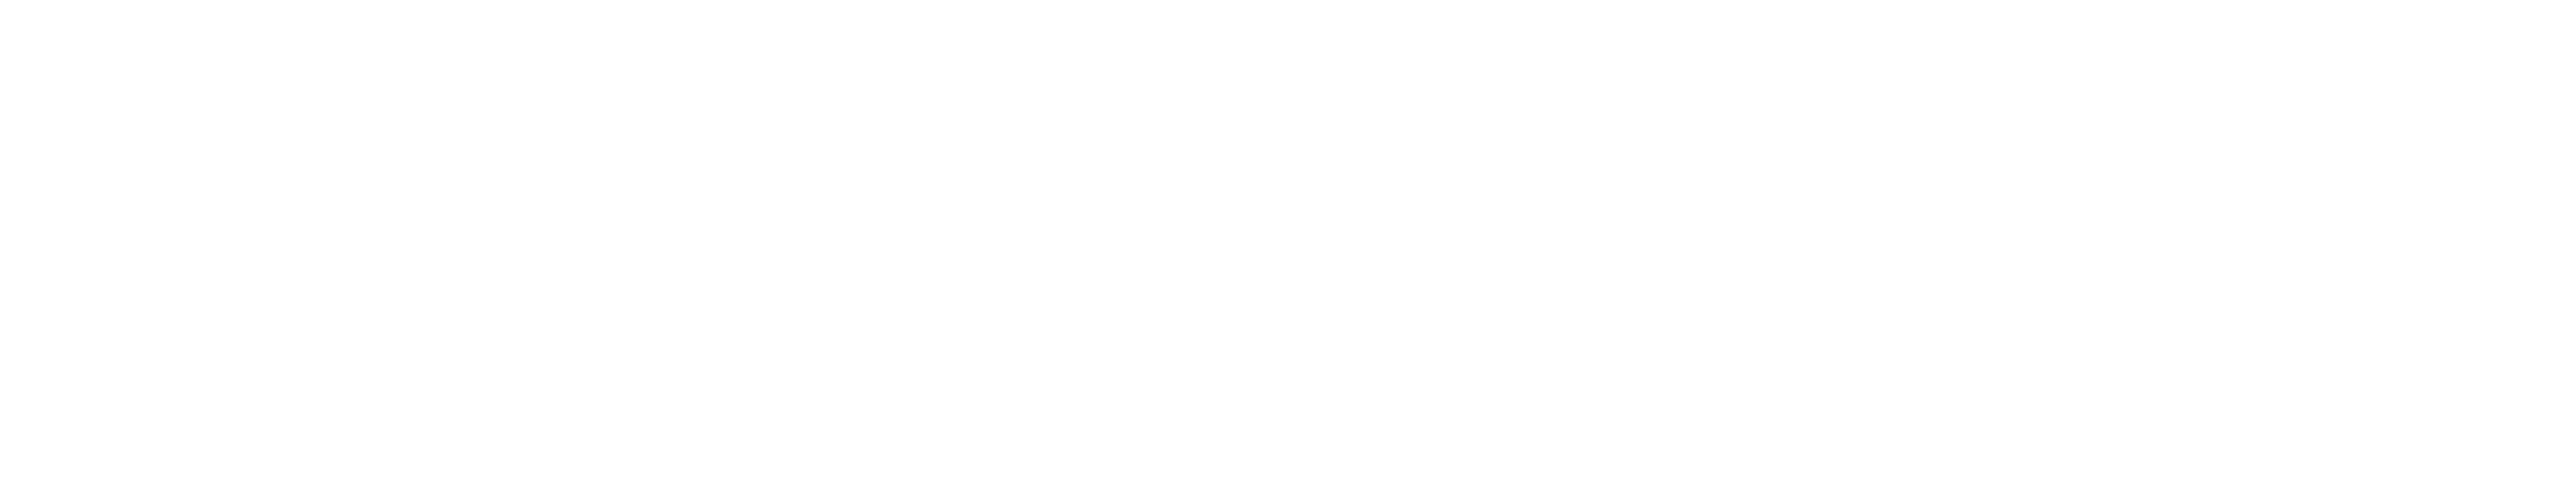 RU58841 IS FOR RESEARCH PURPOSE ONLY, NOT FOR HUMAN & VETERINARY CONSUMPTION